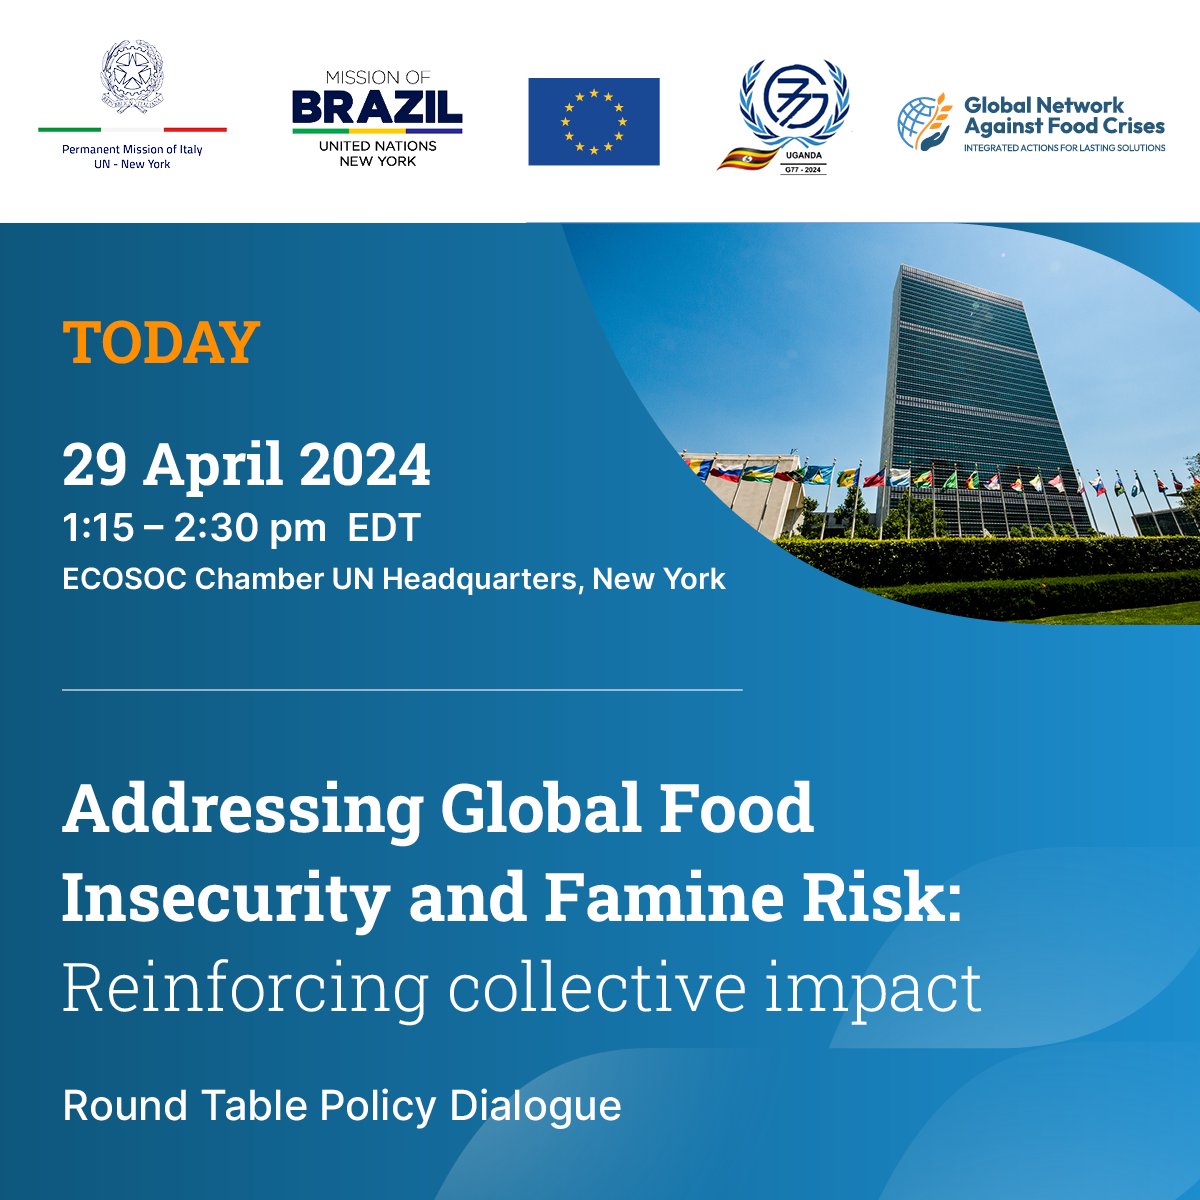 Don't miss it! ➡ TODAY, 1:15-2:30 p.m. EDT at @UN ECOSOC Chamber 💡Addressing Global Food Insecurity and Famine Risk: Reinforcing collective impact - A Round Table Policy Dialogue Event Information 🔗bit.ly/3UwPh2t Tune in live with UN Web TV 🔗bit.ly/3wcQy5z